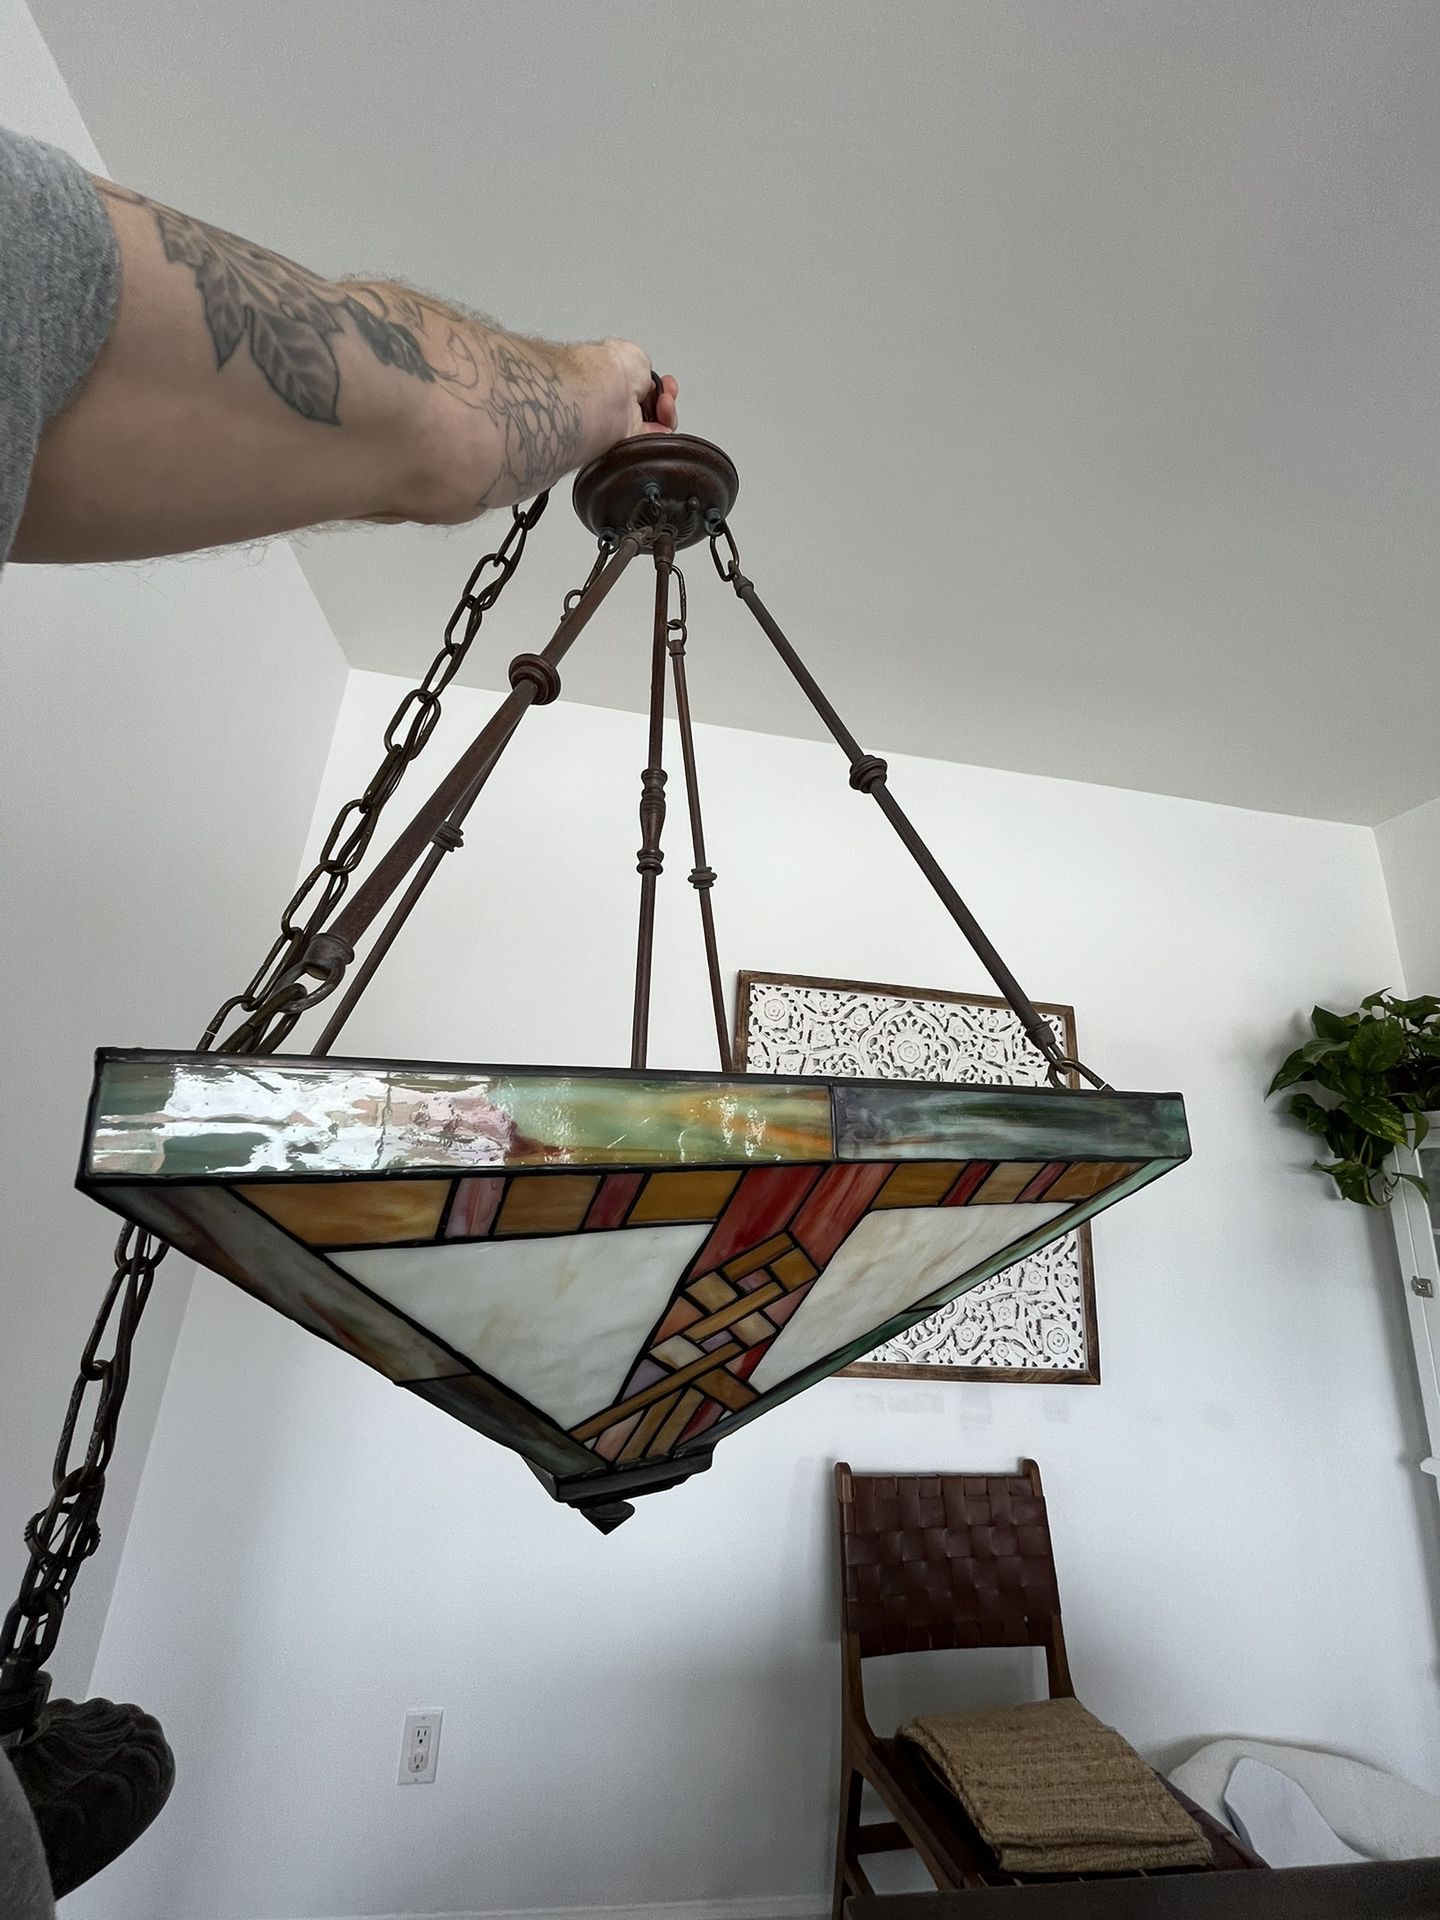 Antique Stained Glass Pendant Lamp